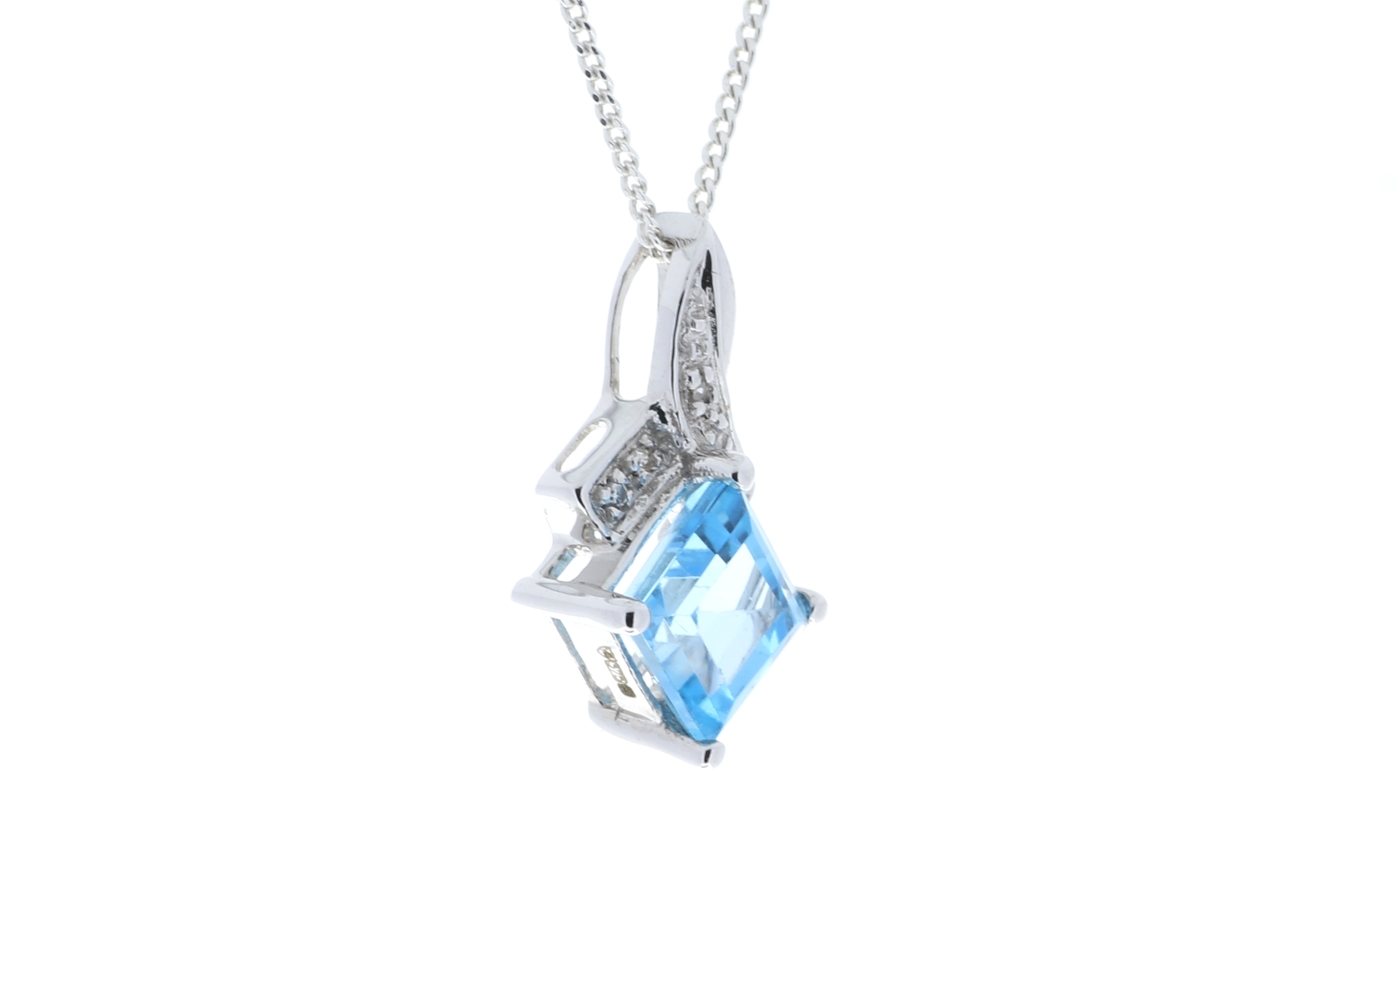 9ct White Gold Diamond And Blue Topaz Pendant (BT1.29) 0.02 Carats - Image 2 of 6